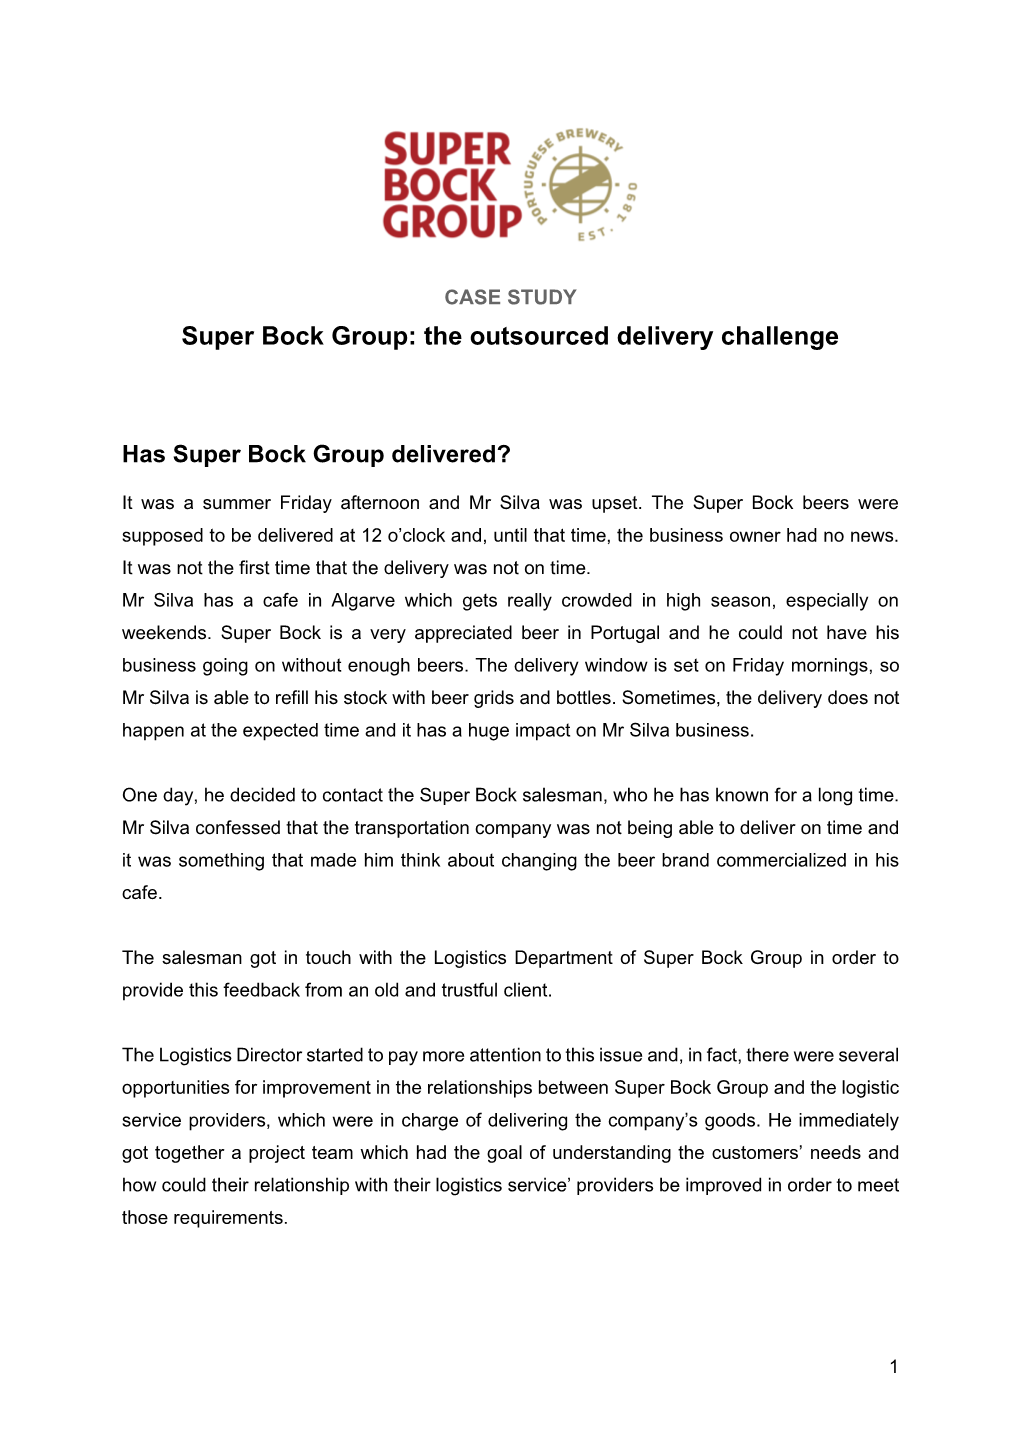 Super Bock Group: the Outsourced Delivery Challenge